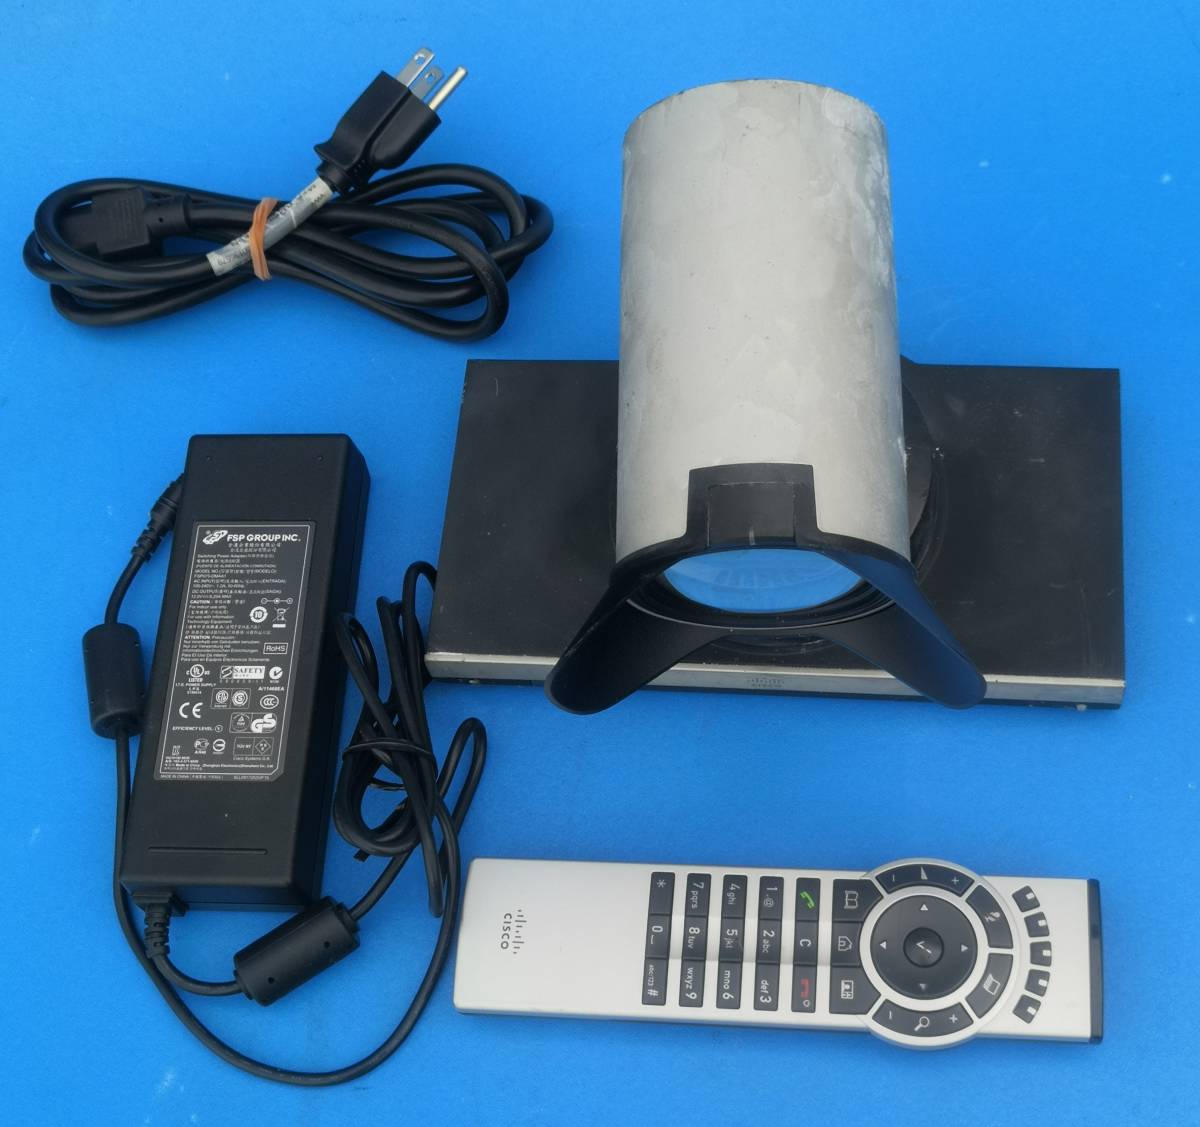  Cisco TANDBERG for meeting camera TTC8-02 operation verification settled punch ruto zoom remote control power supply adaptor attached 